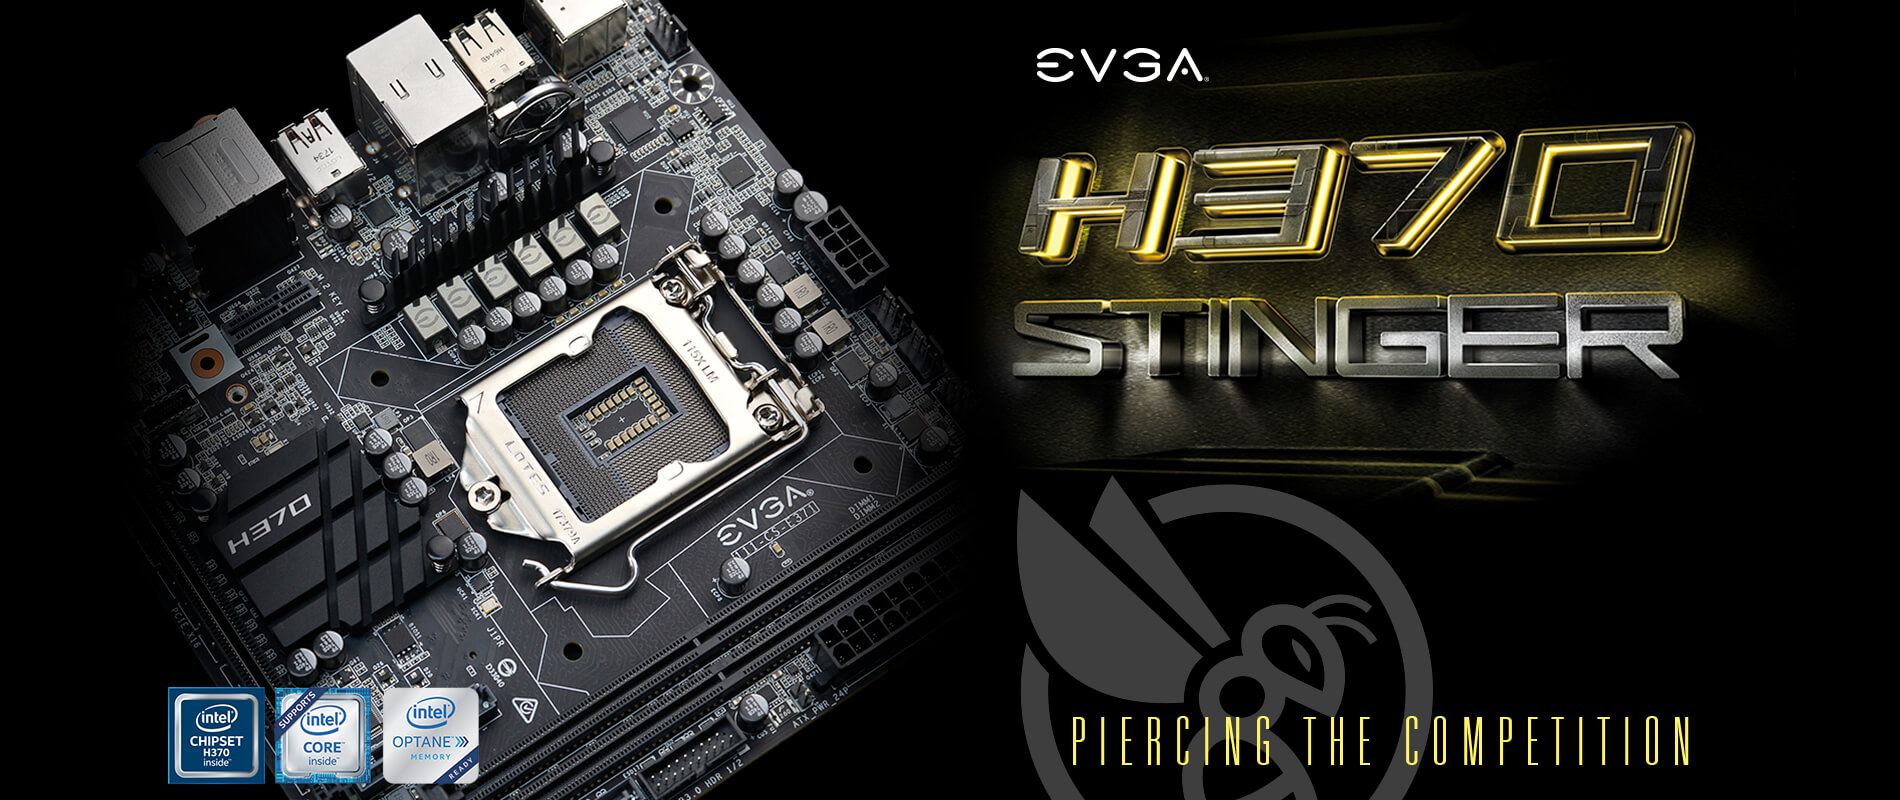 EVGA H370 Stinger - Piercing The Competition